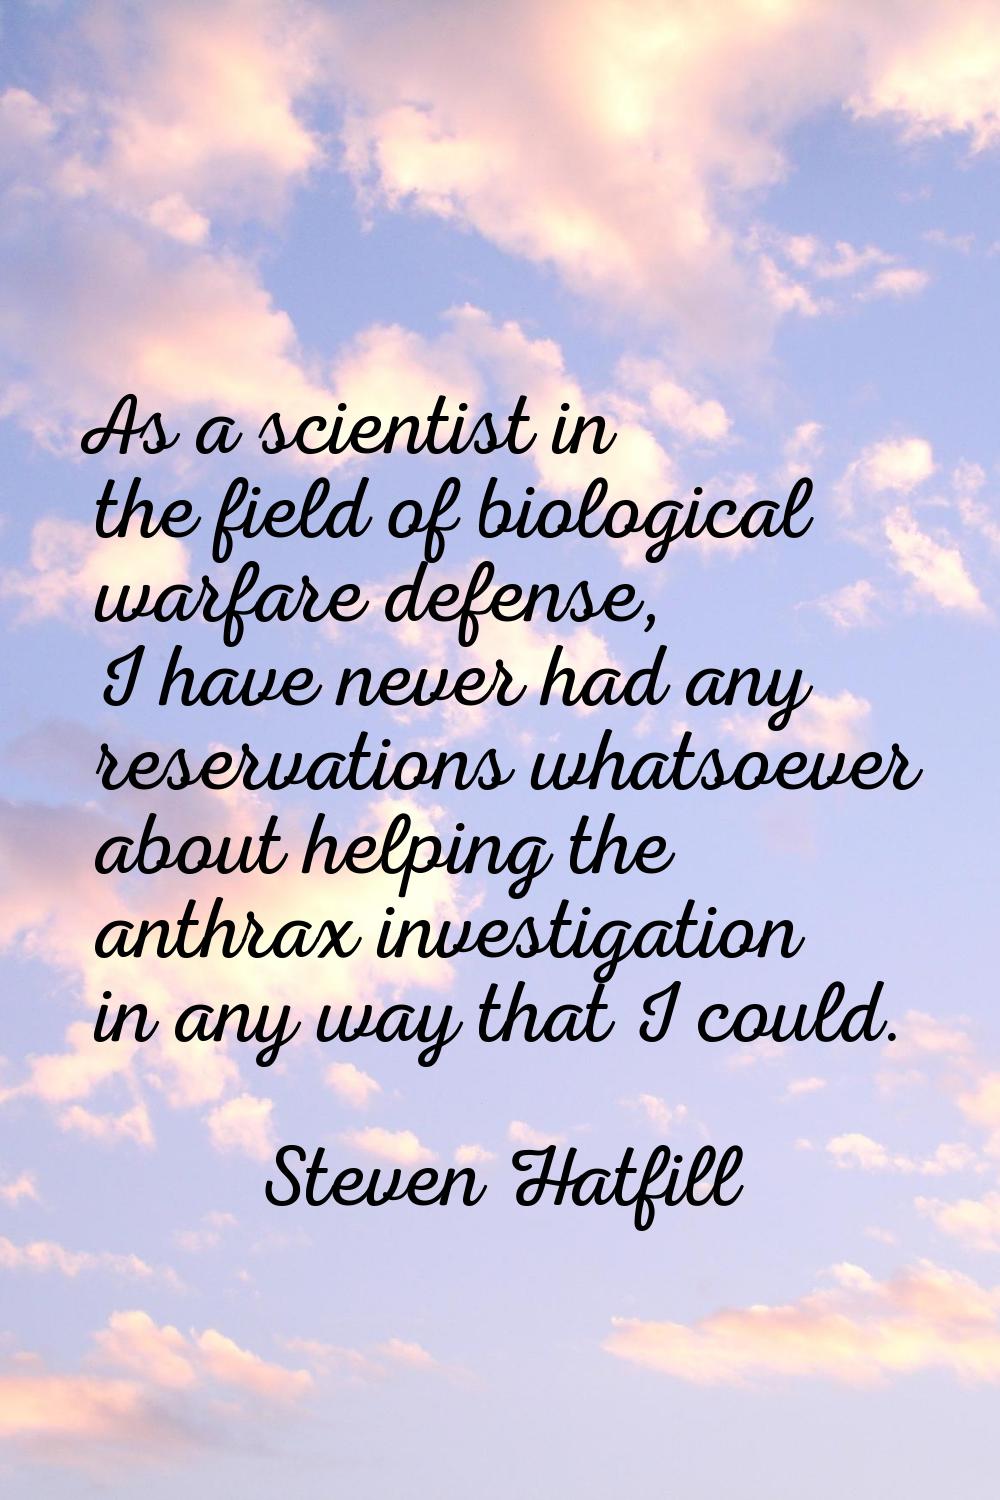 As a scientist in the field of biological warfare defense, I have never had any reservations whatso